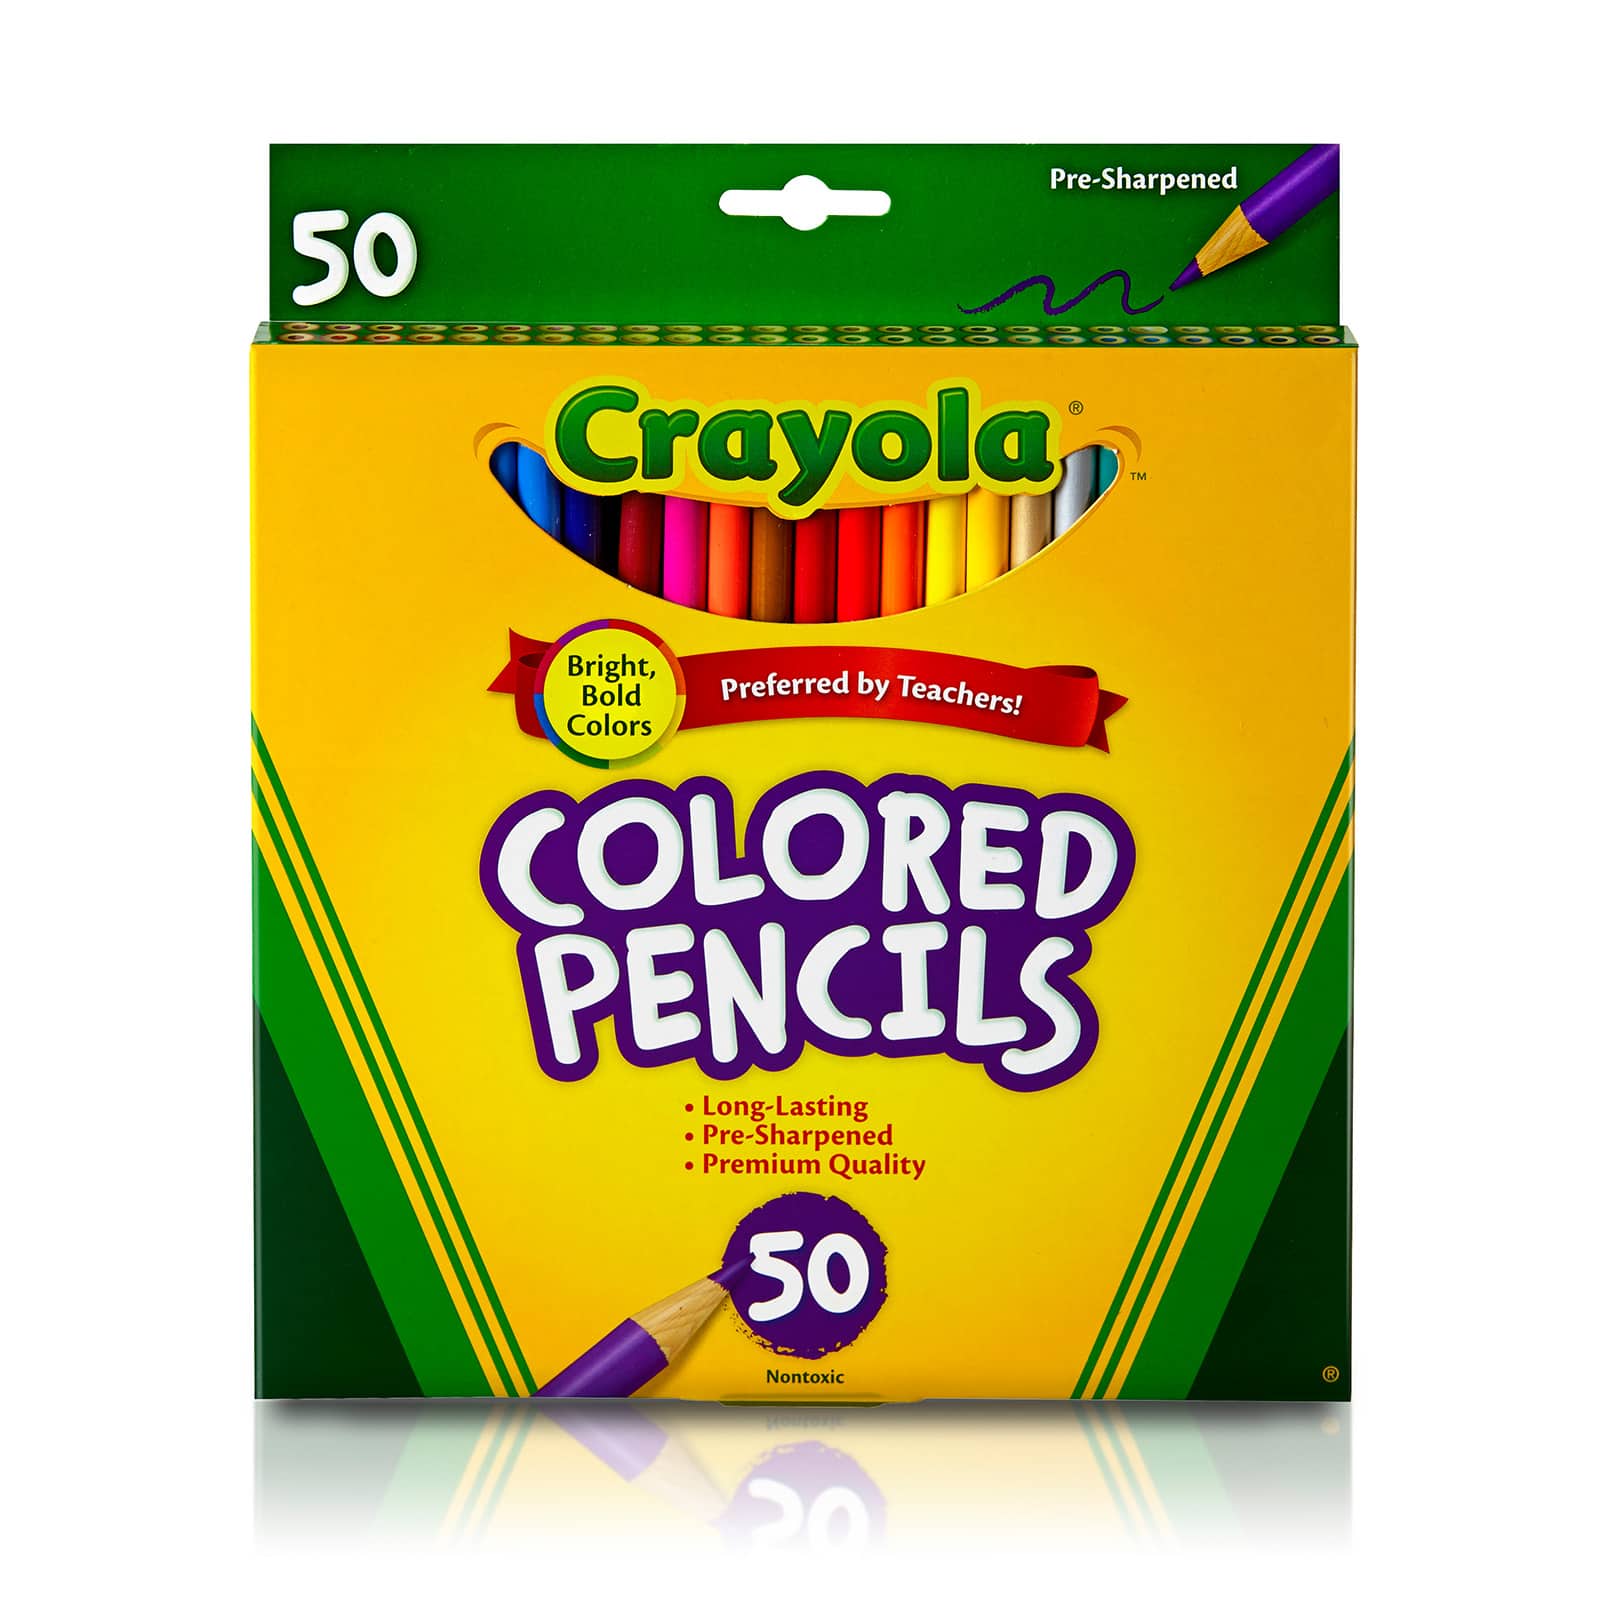 Faber-Castell Grip Colored EcoPencils - 24 Pack Colored Pencils,  Pre-Sharpened